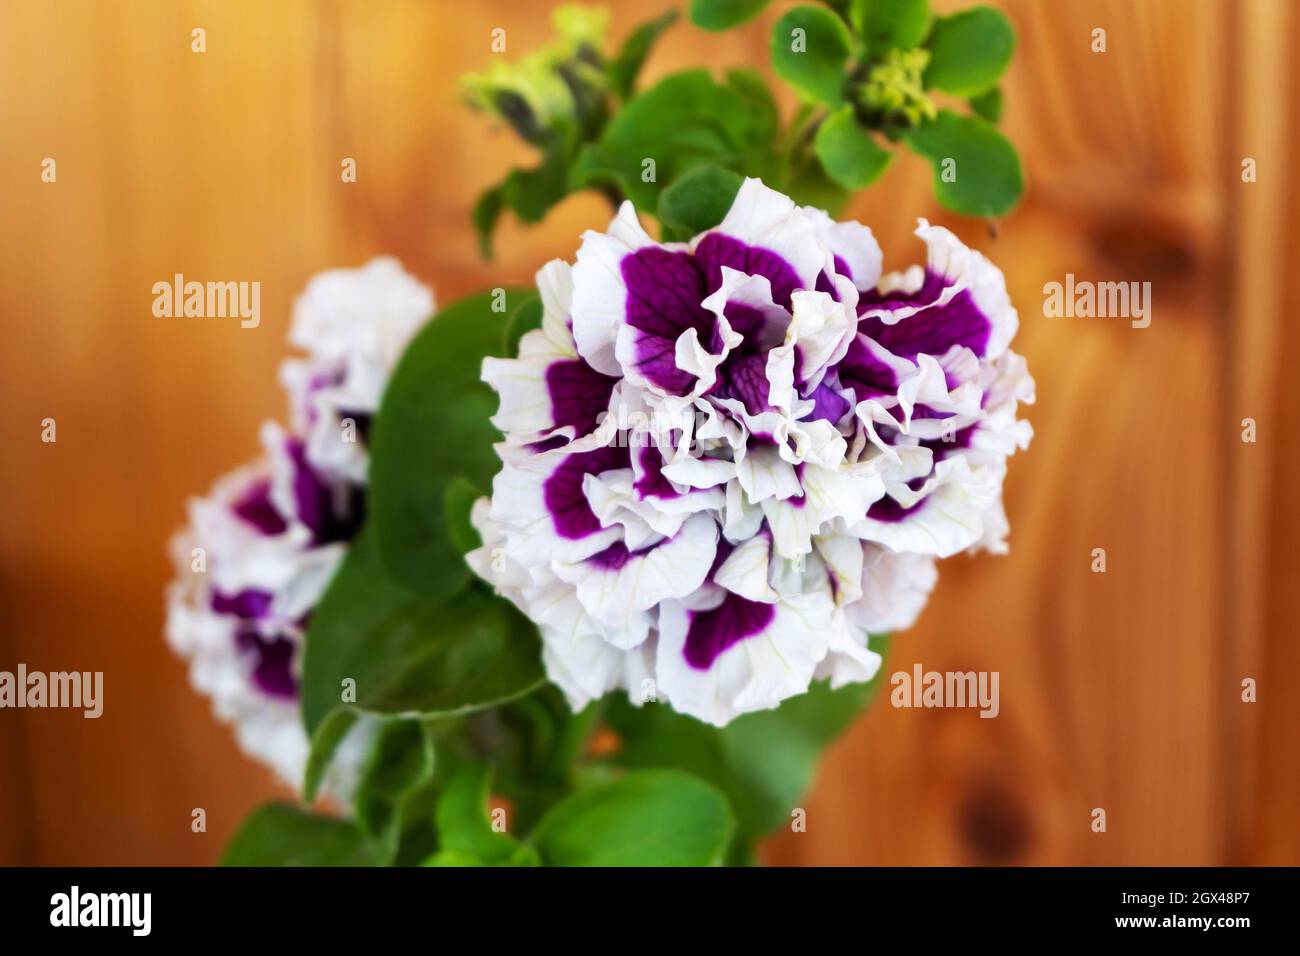 Terry petunia flower Pirouette parple F1 close-up on a wooden background. Stock Photo